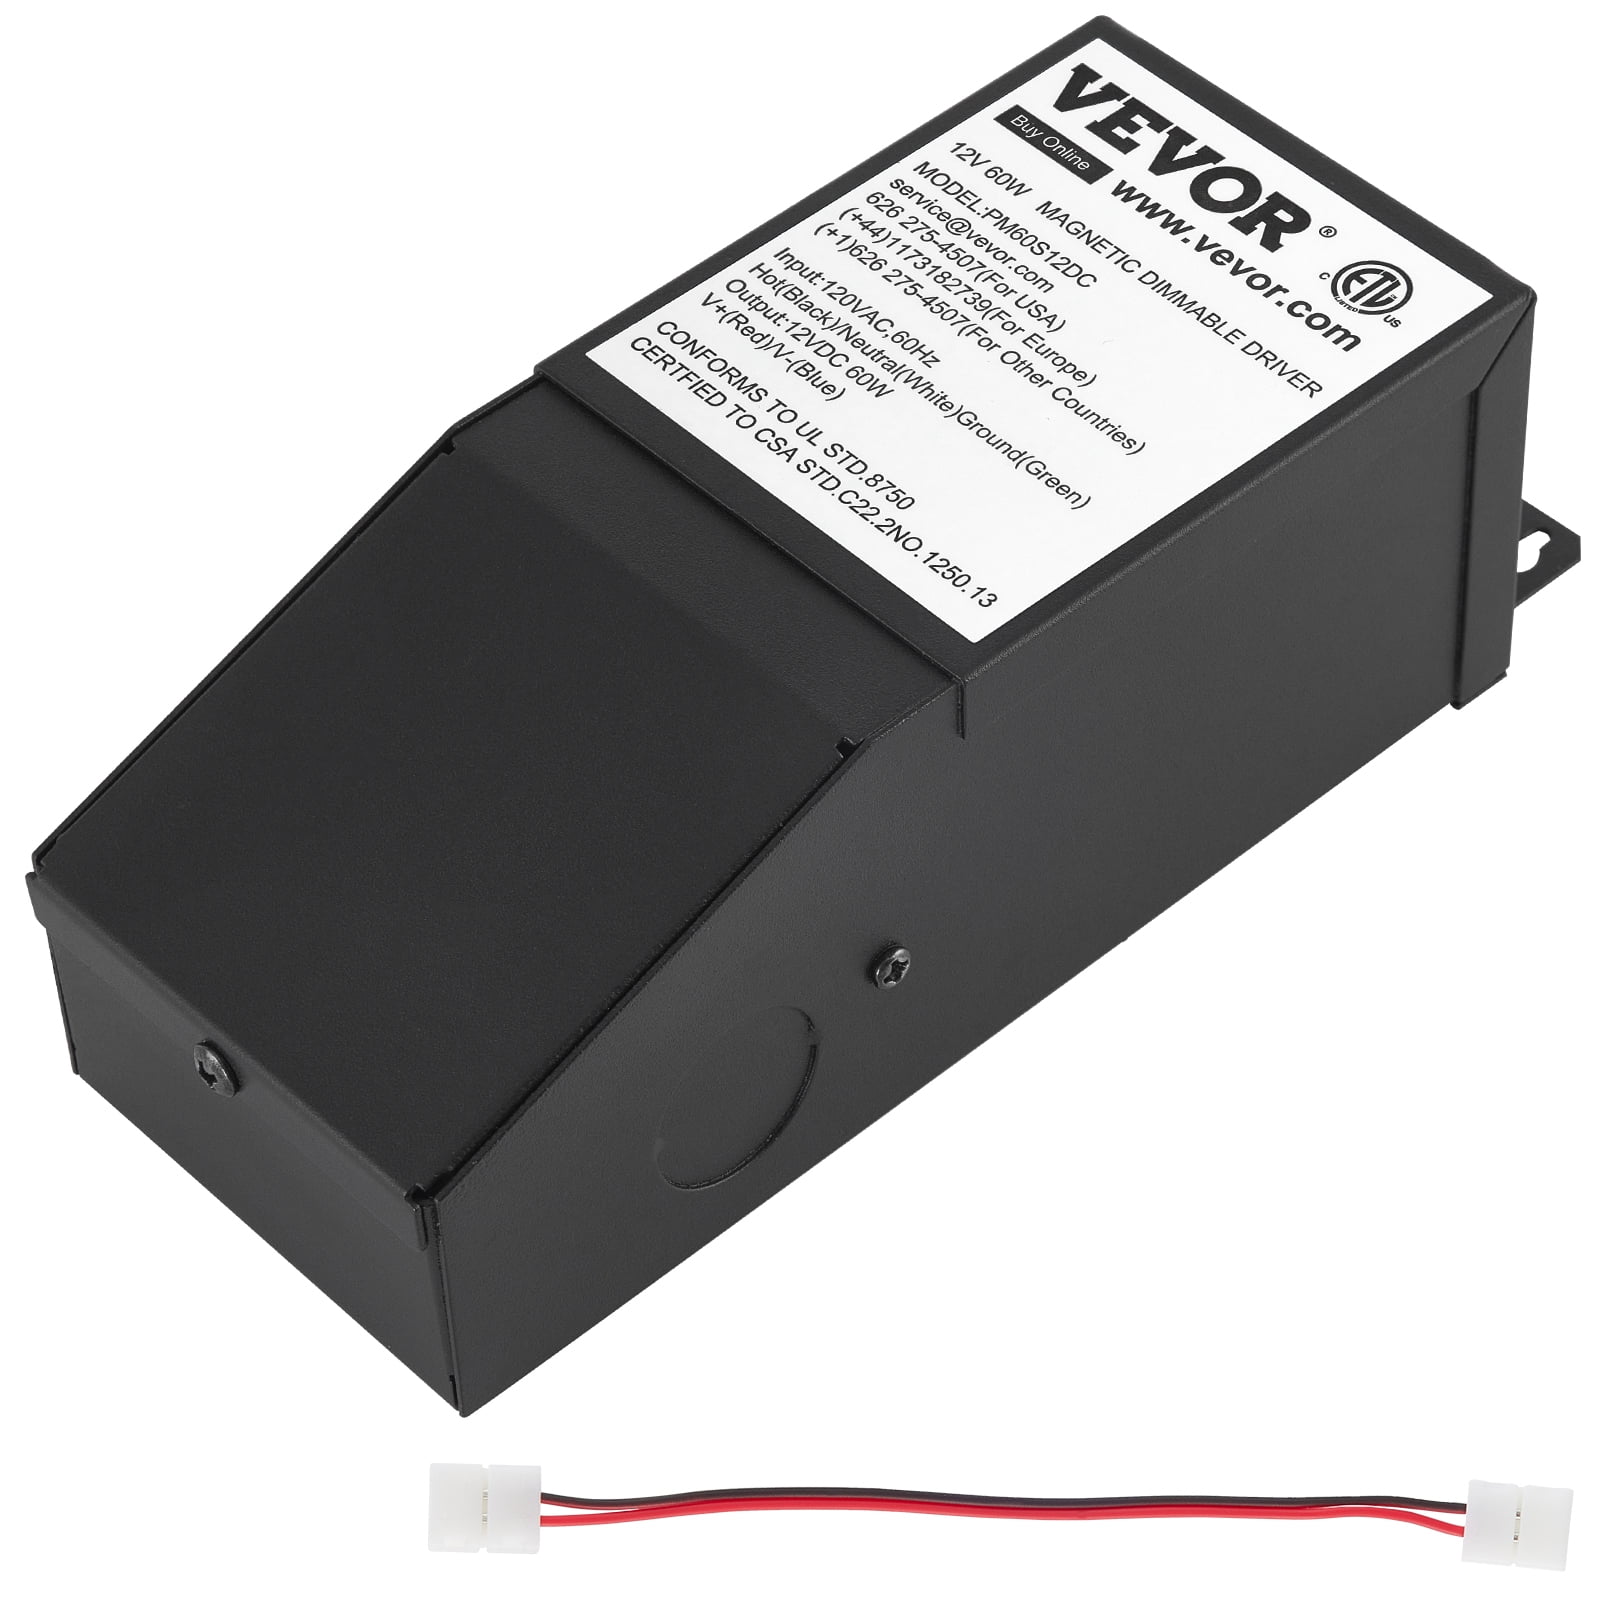 60W 12V 5A Dimmable Driver for LED strips Dims from 110V Dimmer Transformer